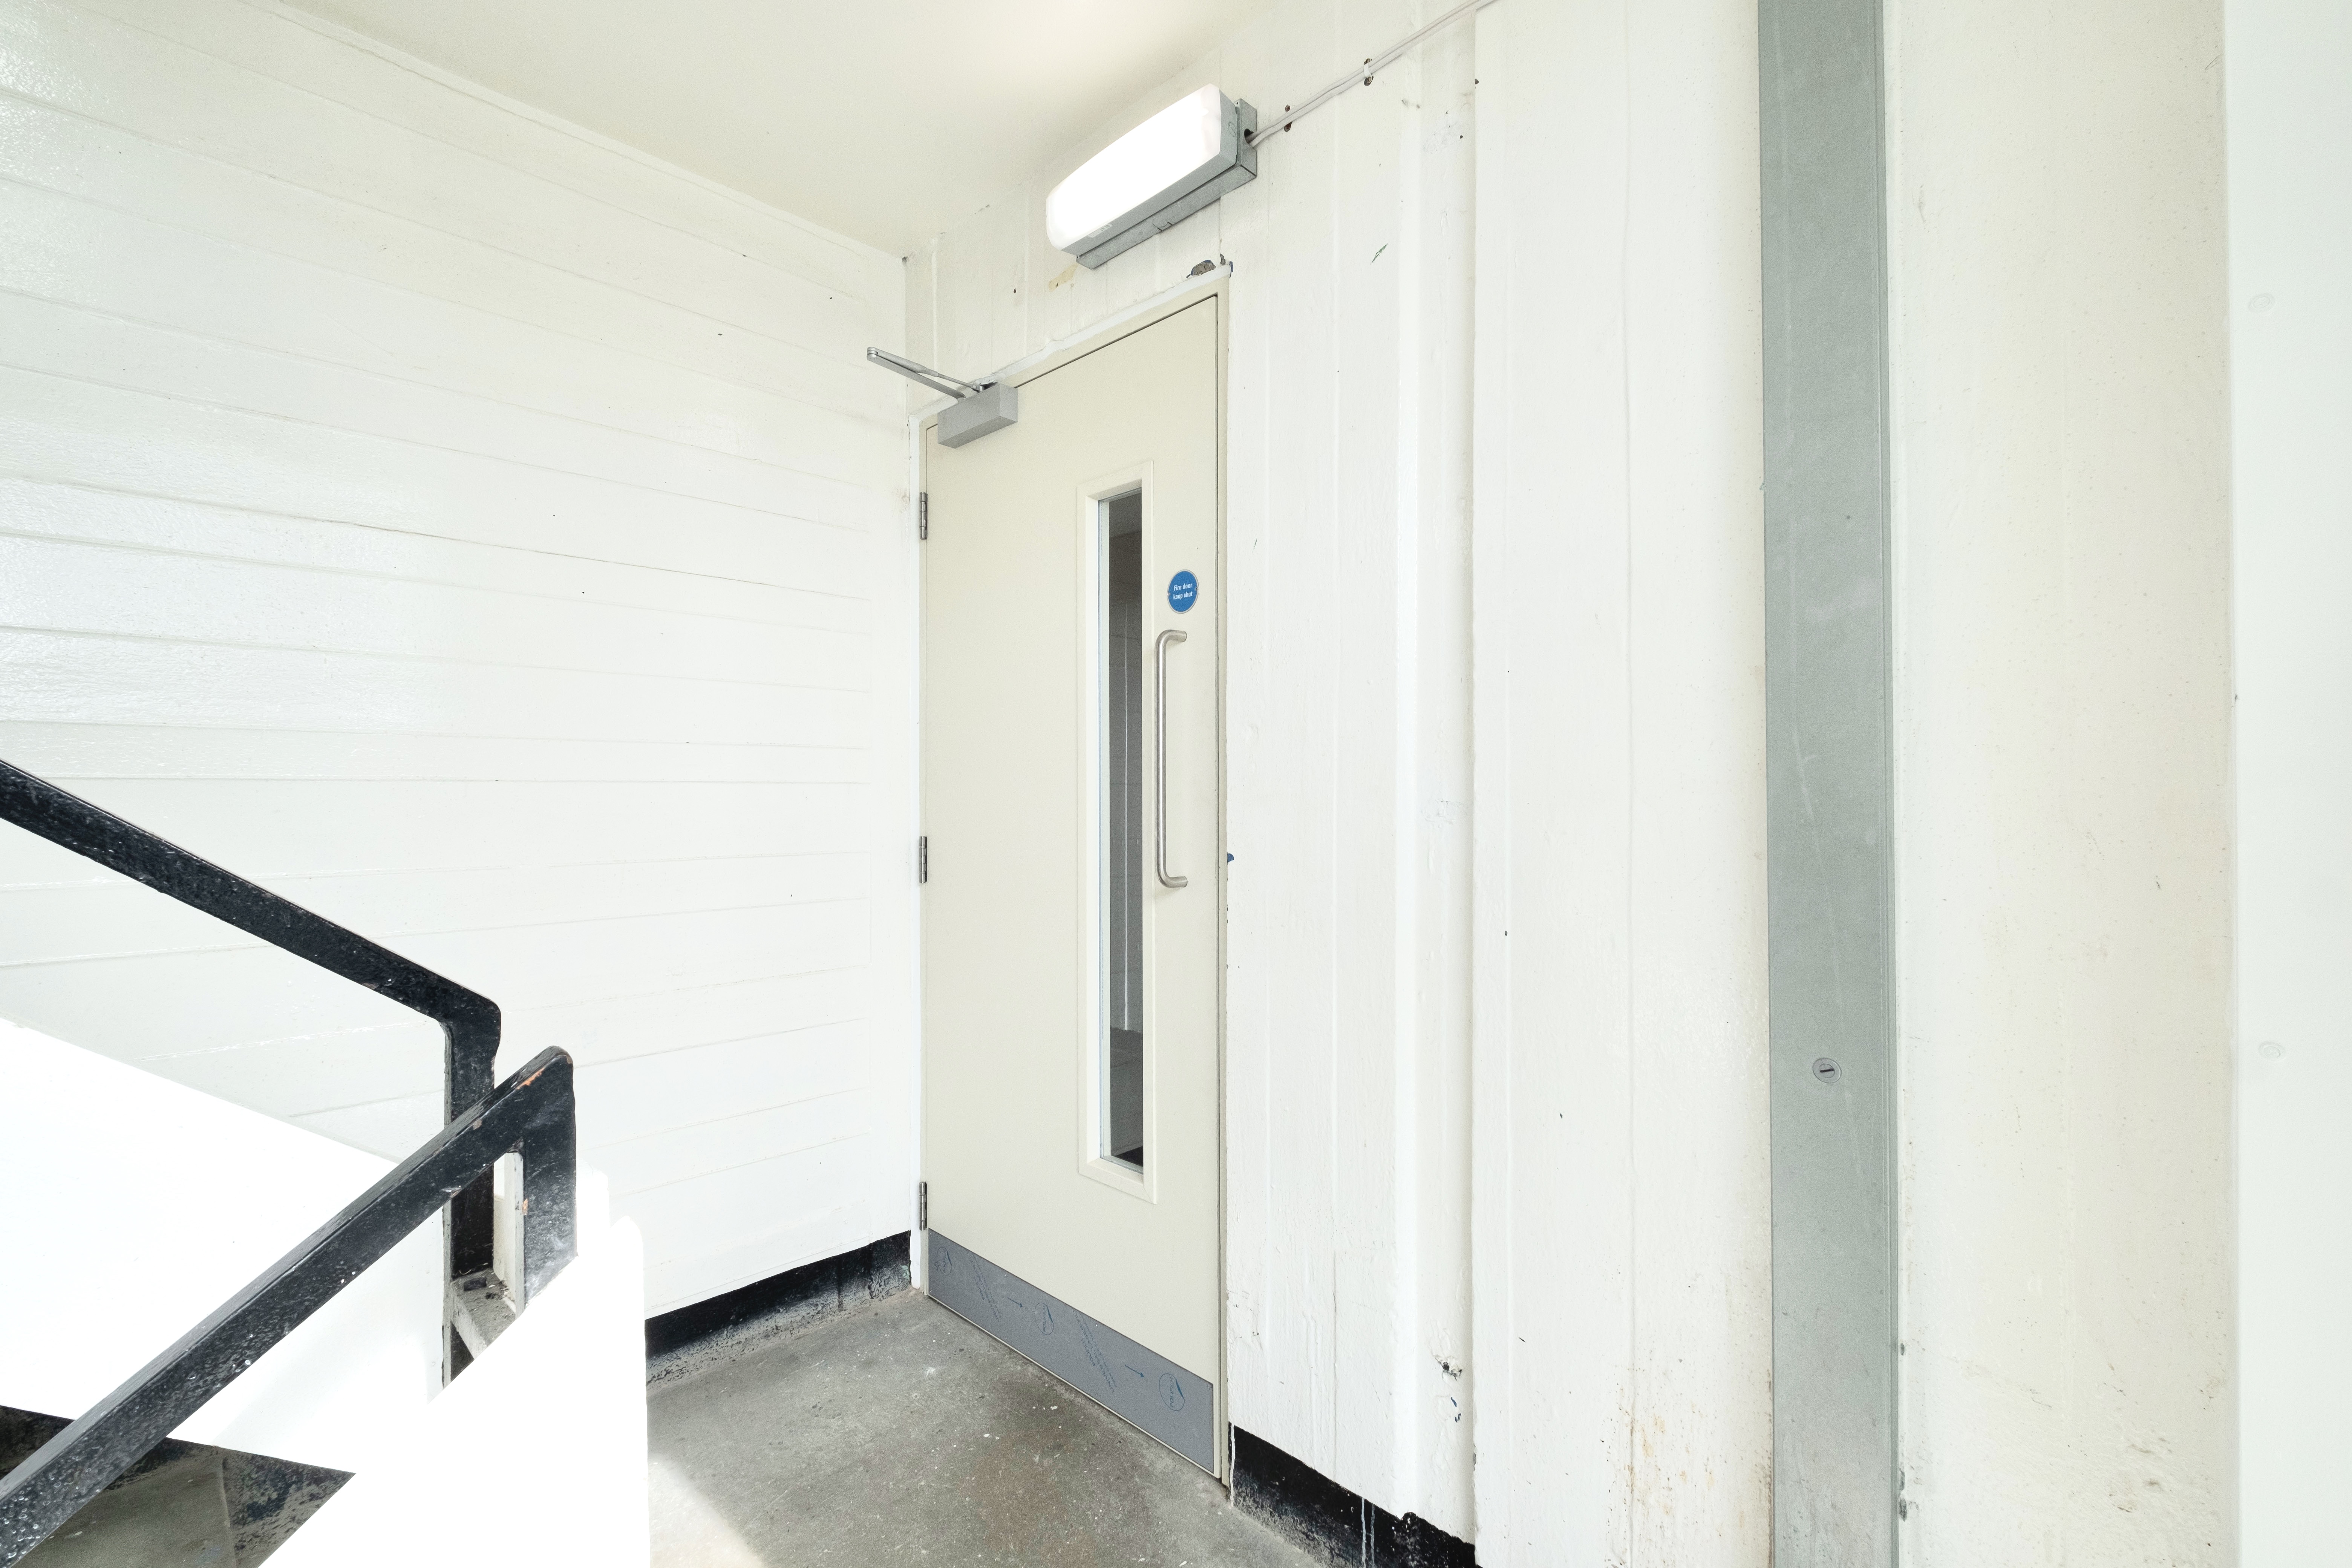 CCG delivers new door screens to New Gorbals high-rise residents